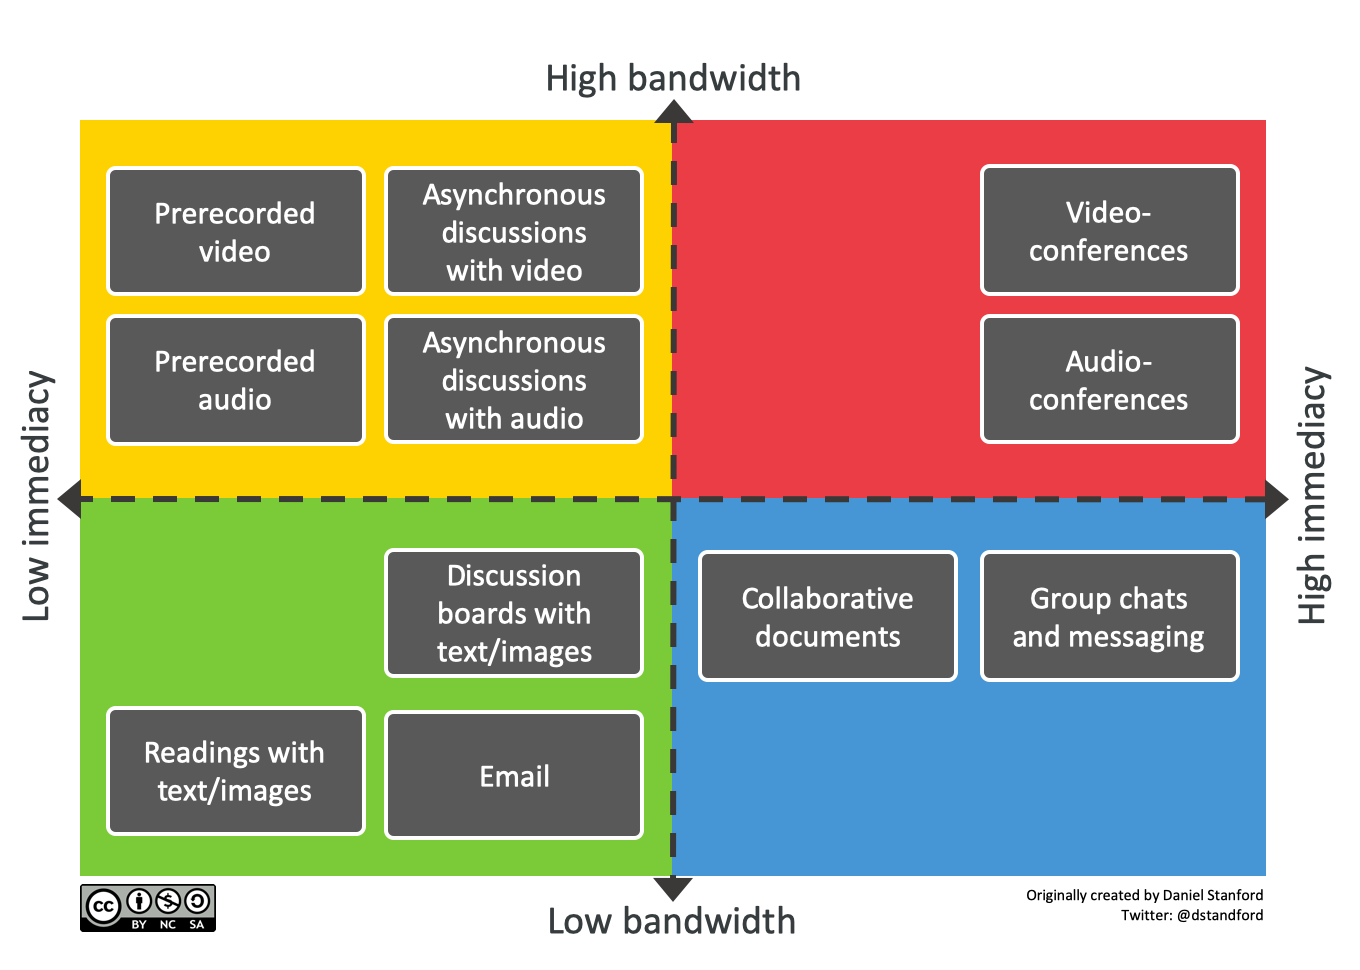 Examples of high/low bandwidth and immediacy teaching options.